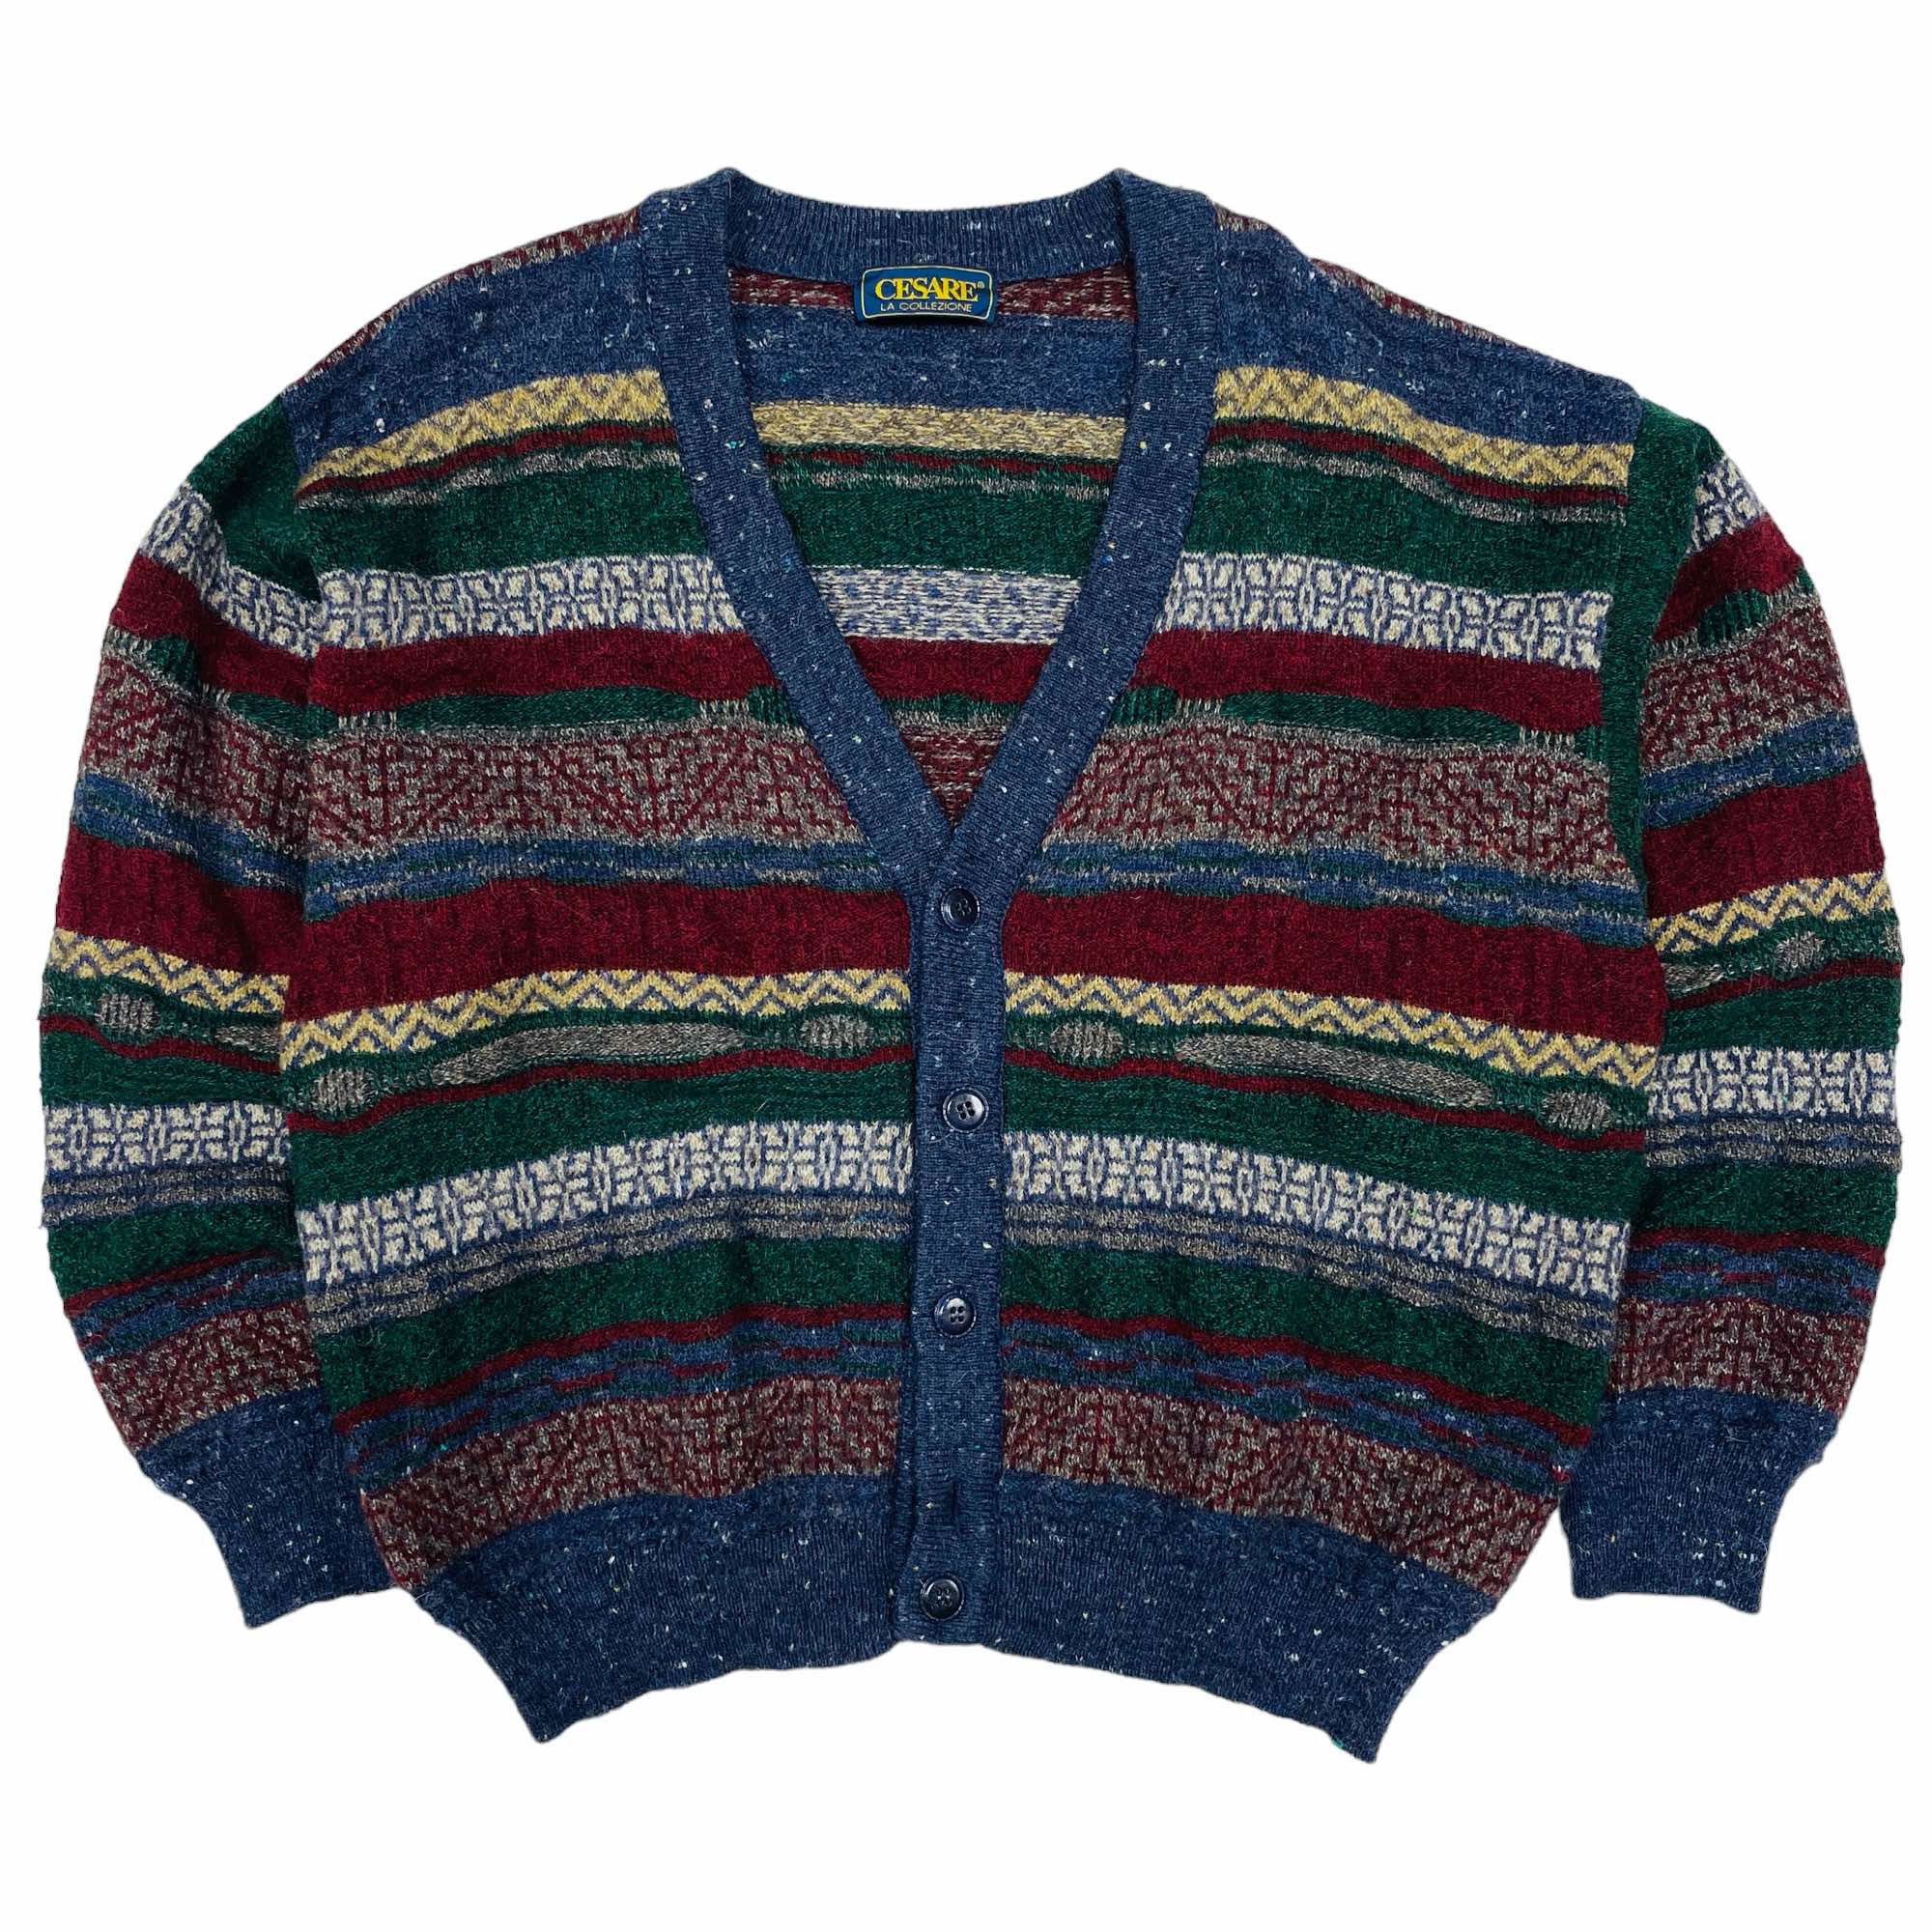 Patterned Knitted Cardigan - Large